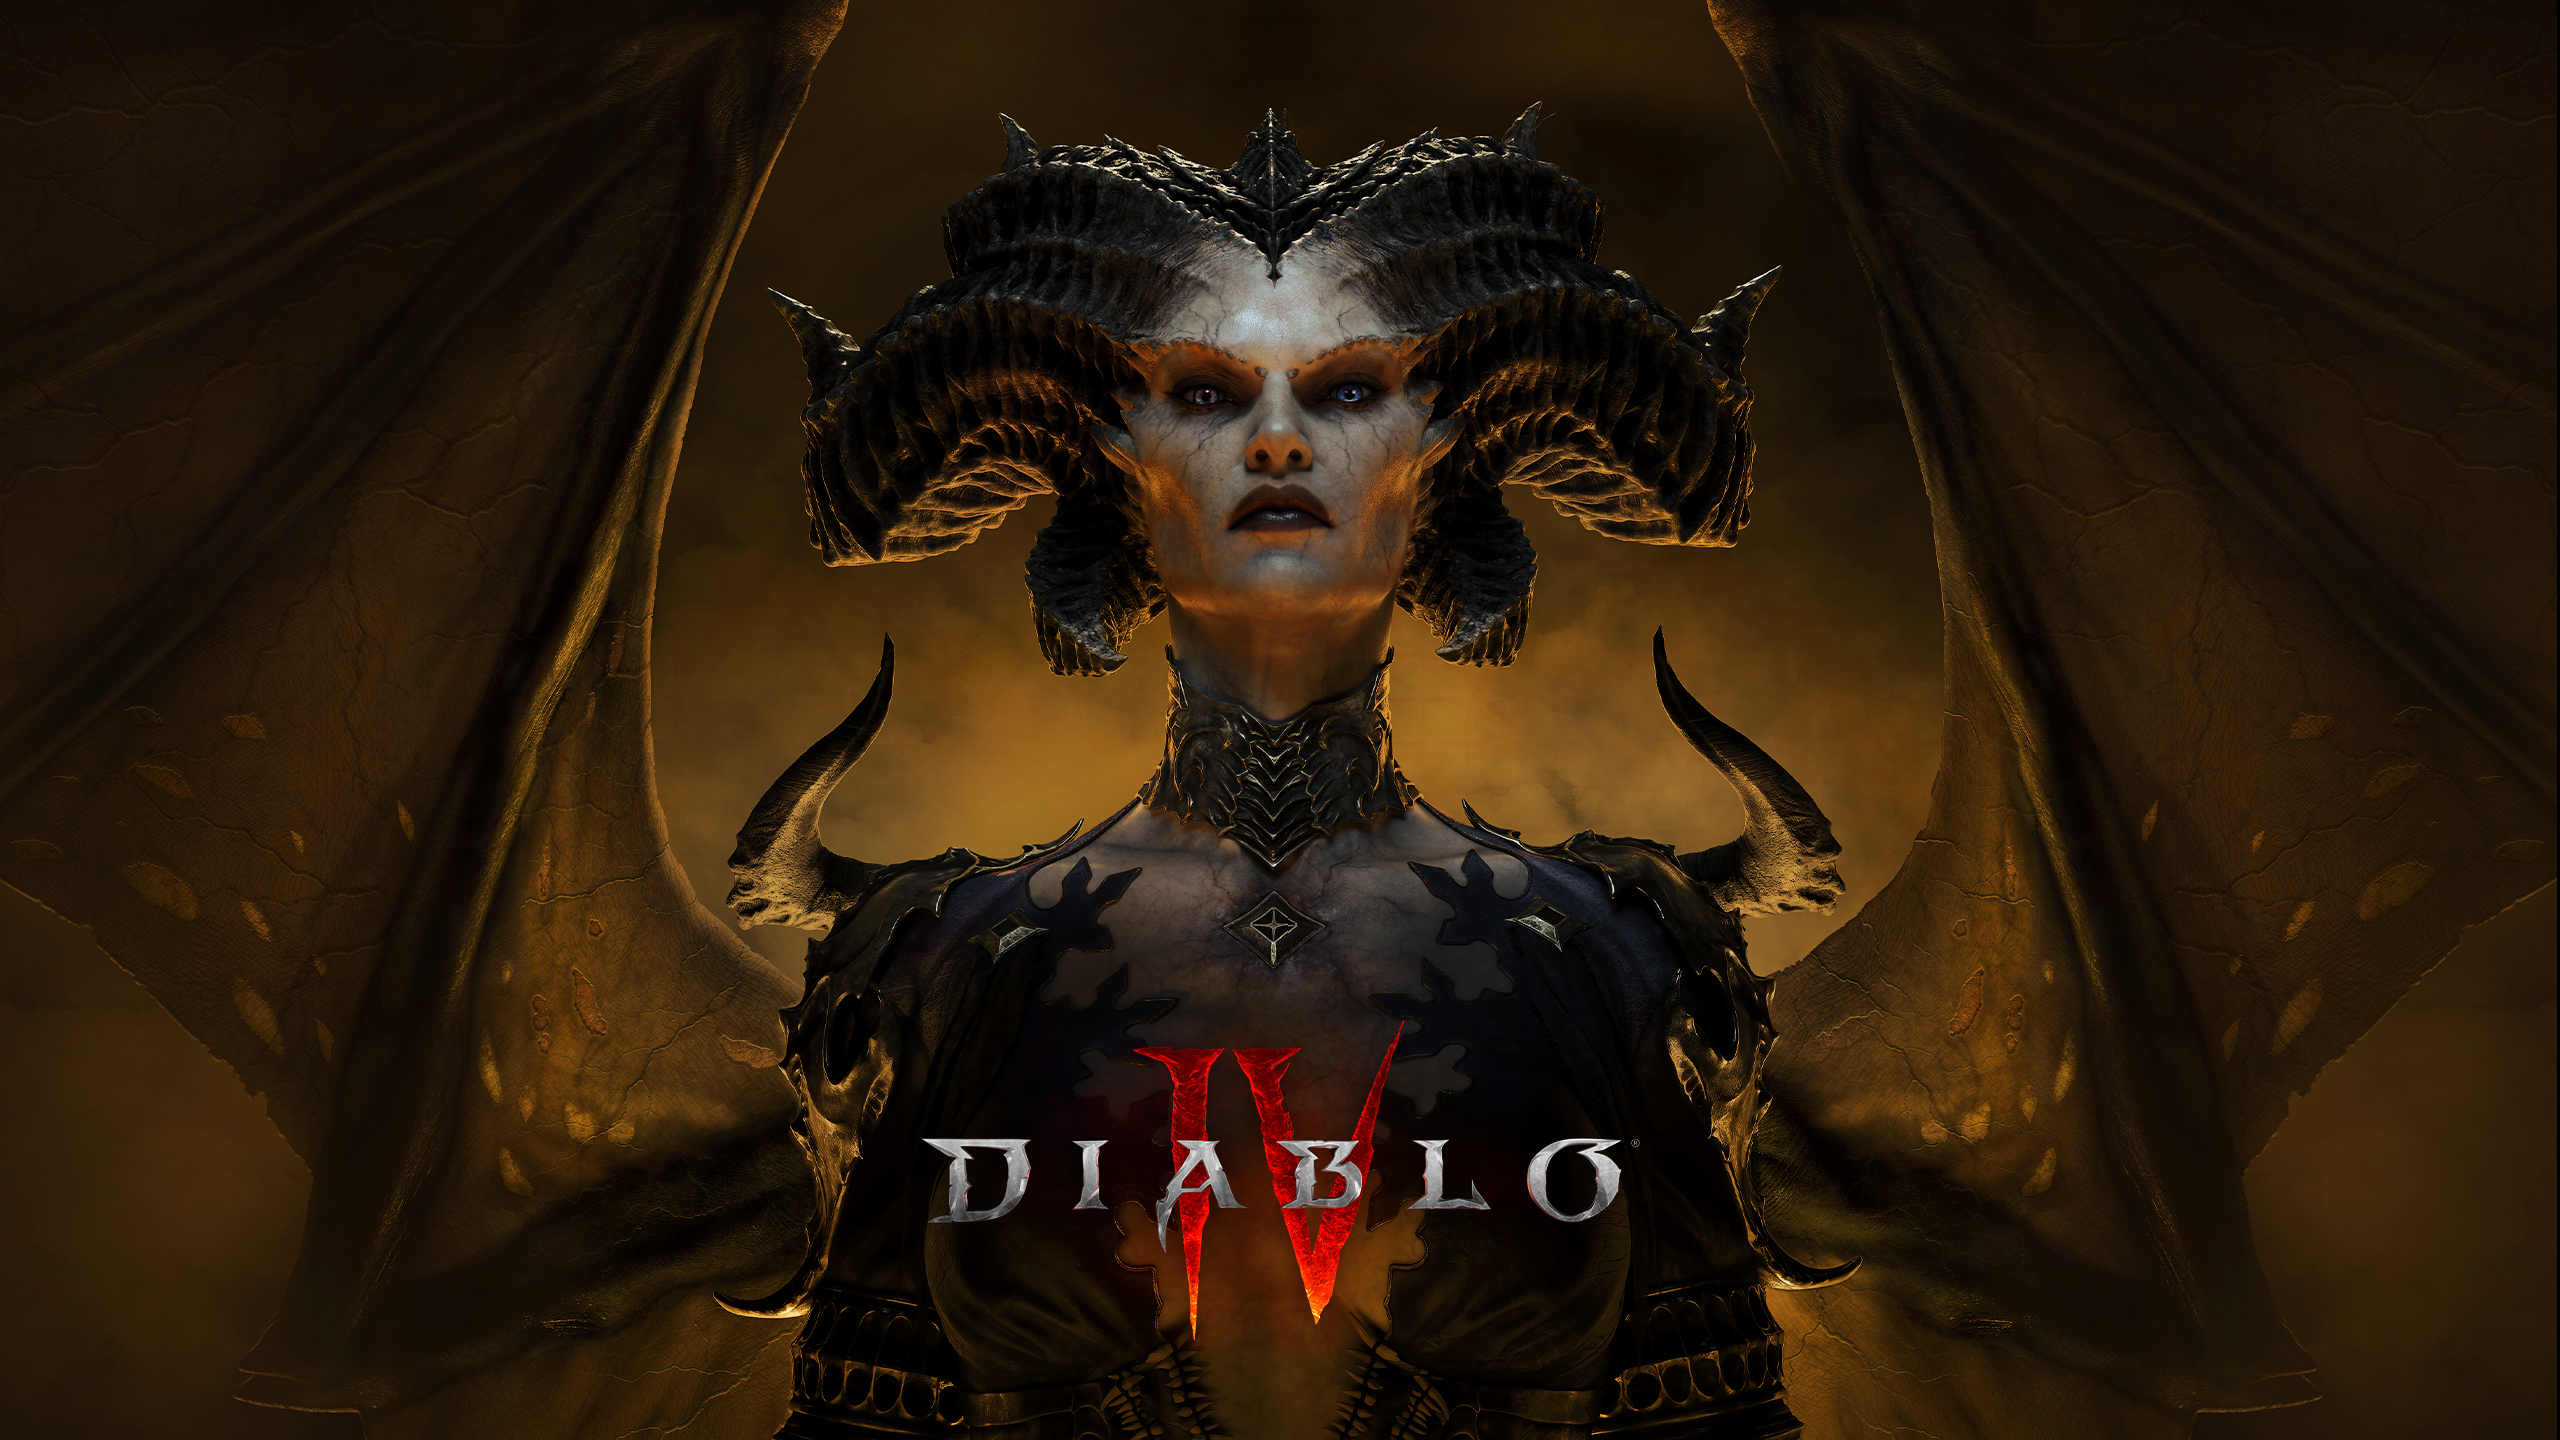 London Prepared for Diablo III Release with Eye-Catching Display